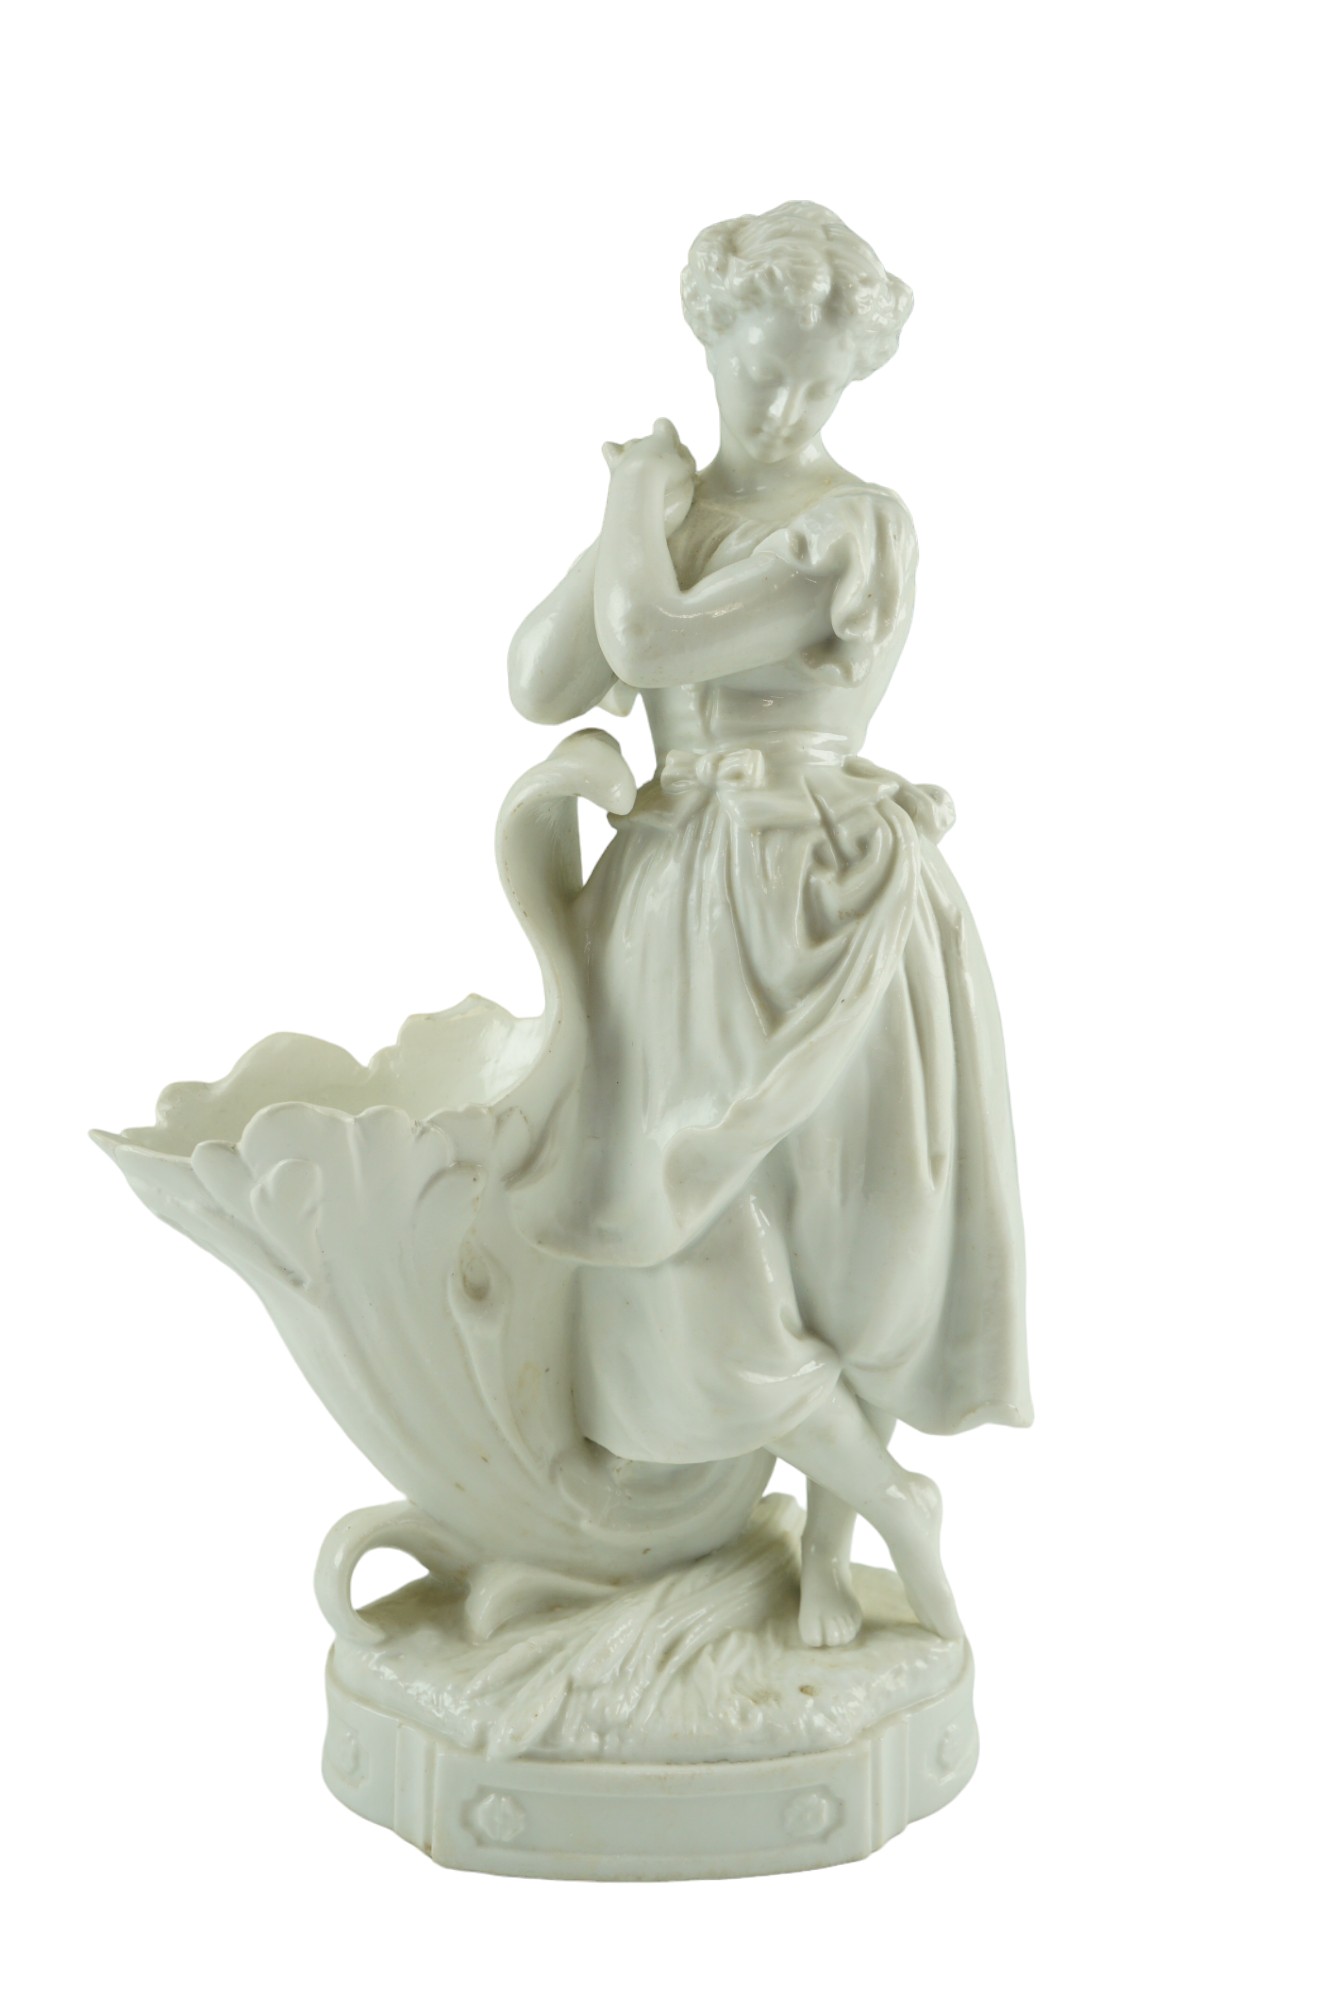 A 19th Century Meissen blanc-de-chine spill vase modelled as a young woman posed coyly, 28 cm, (a/